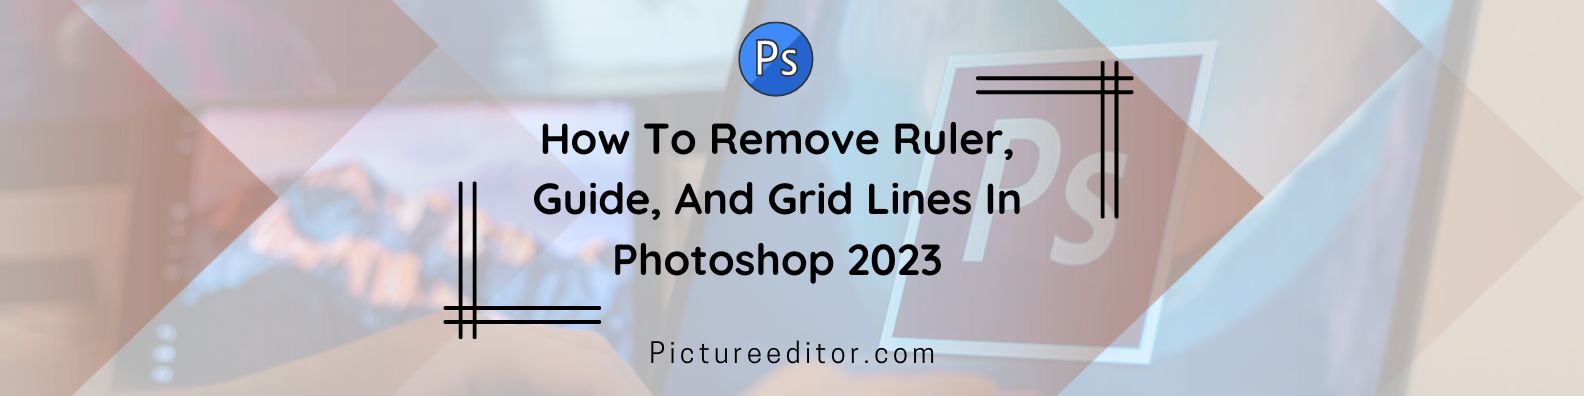 How To Remove Ruler, Guide, And Grid Lines In Photoshop 2023